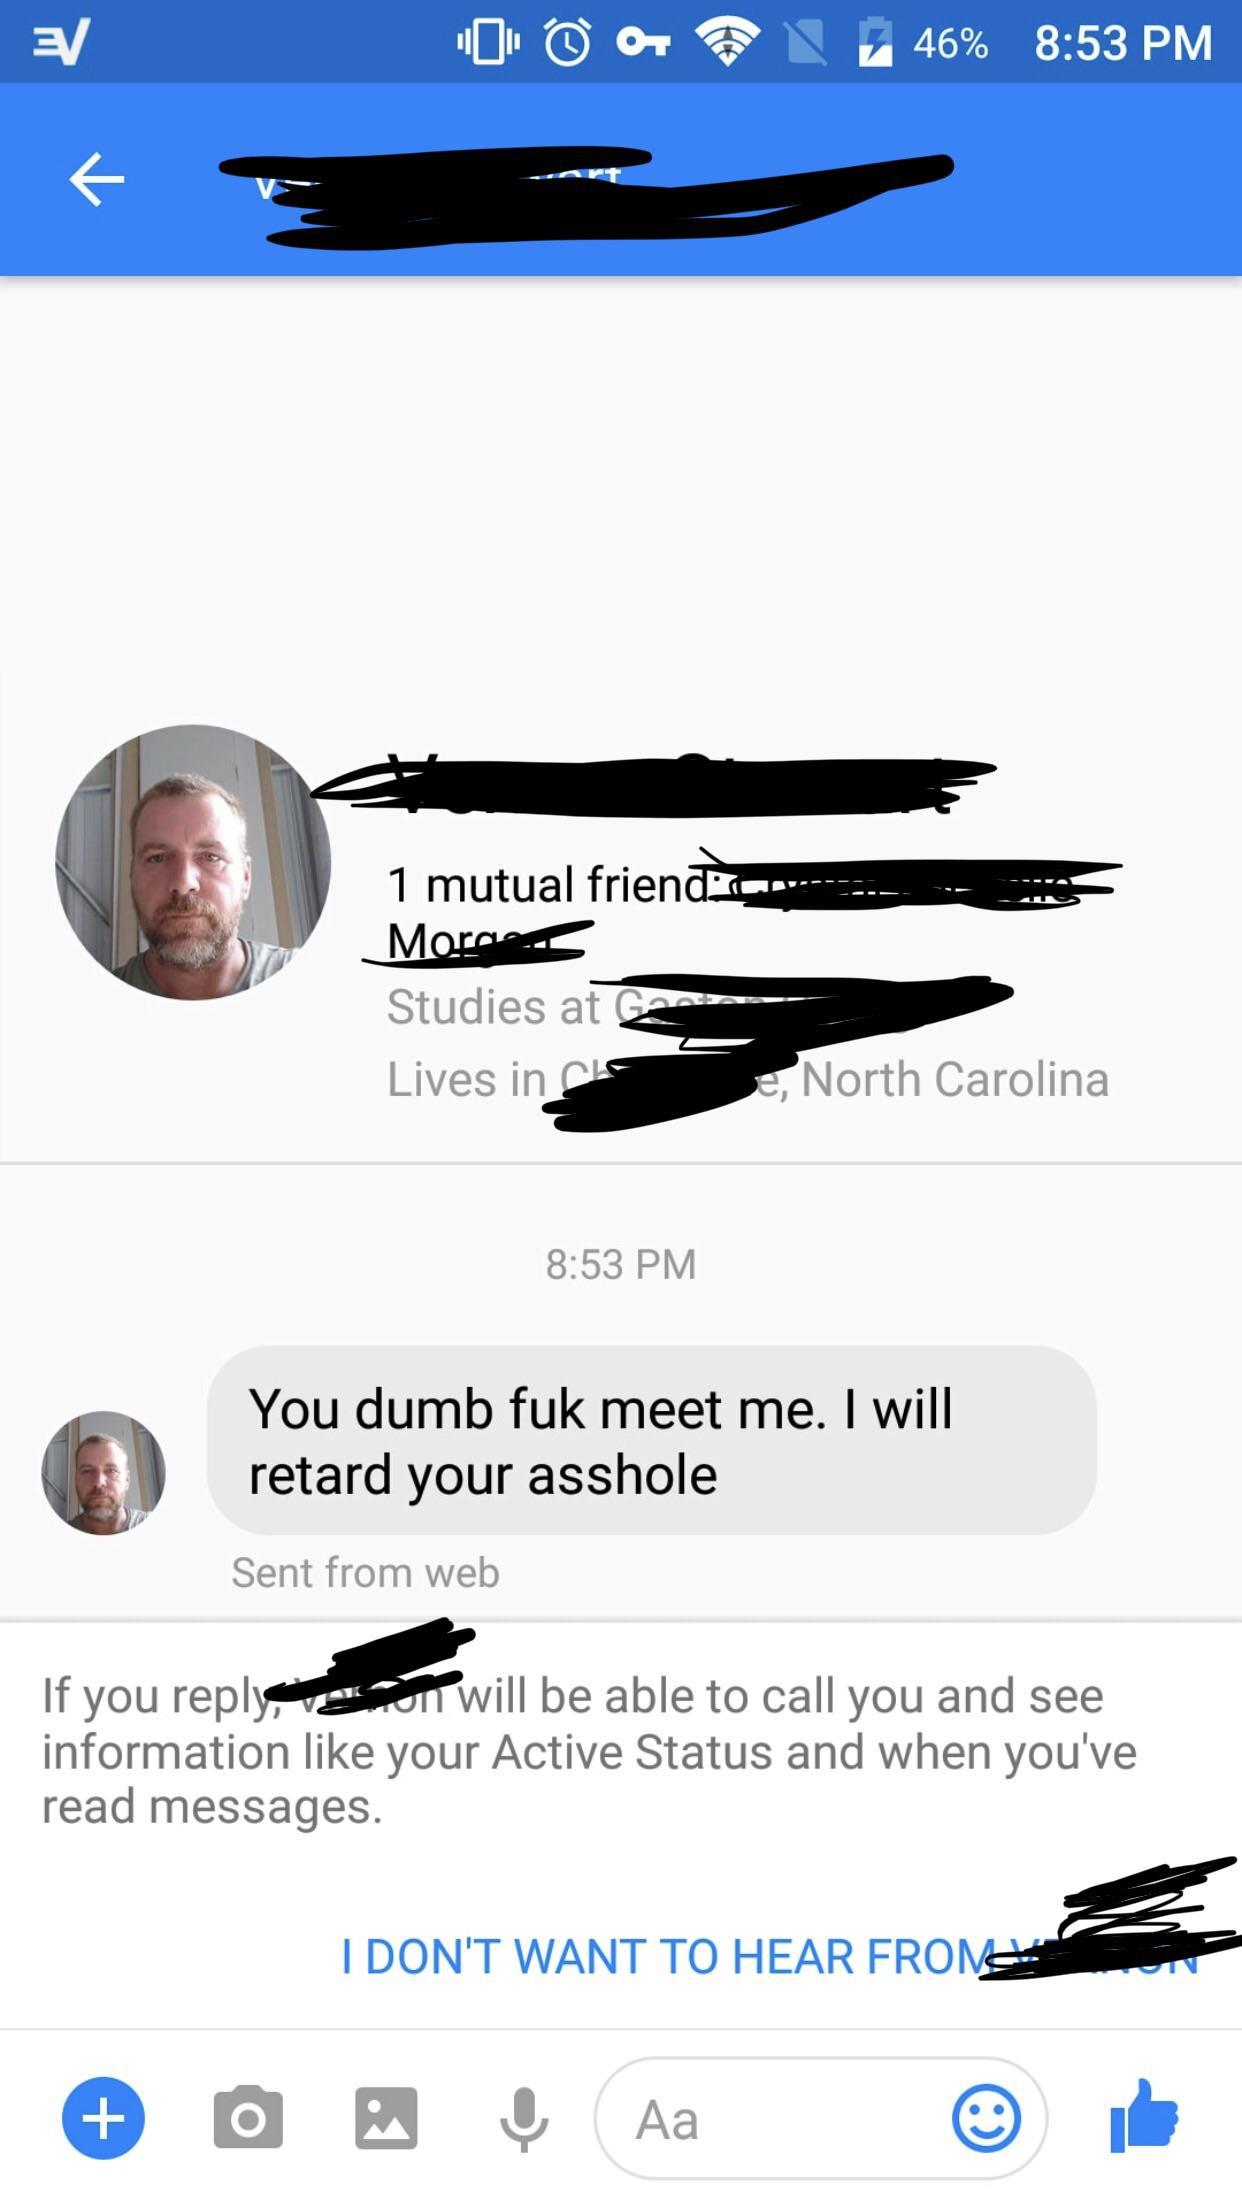 will retard your asshole - Ev O O 46% 1 mutual friend and More Studies at Go Lives in North Carolina You dumb fuk meet me. I will retard your asshole Sent from web If you , I will be able to call you and see information your Active Status and when you've 